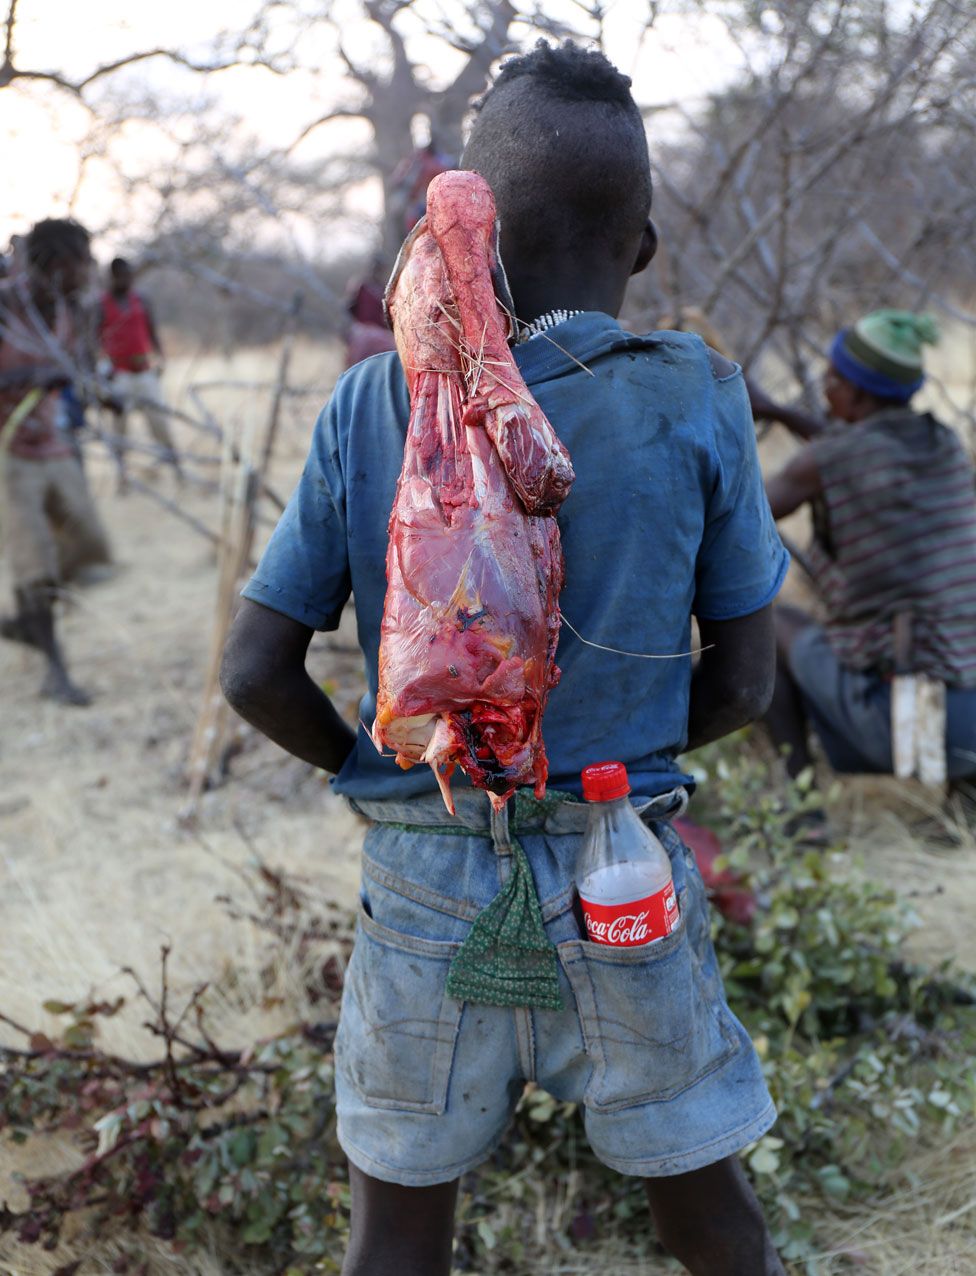 Hadza boy carrying meat and Coke bottle